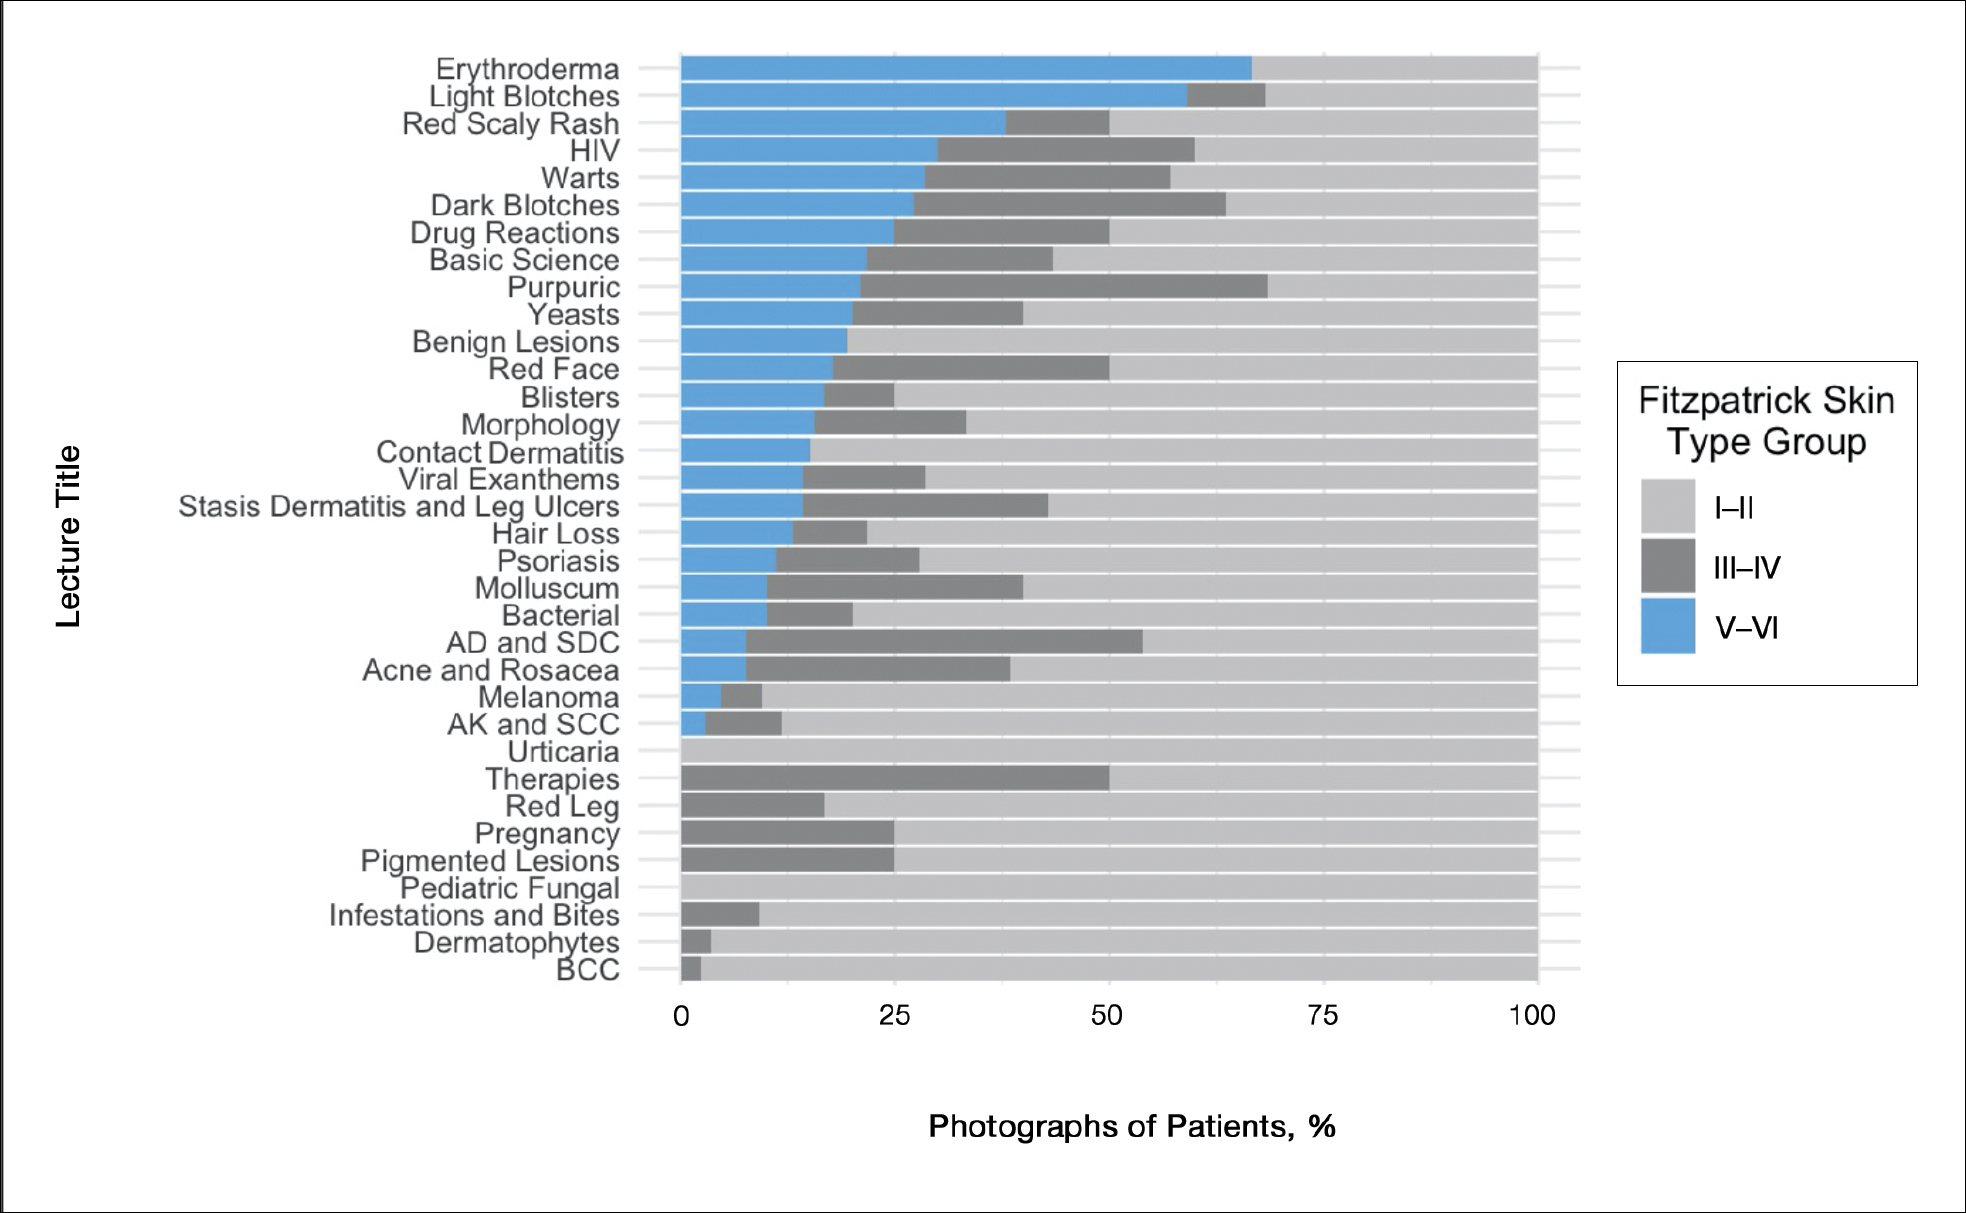 . Percentage of photographs of patients with light and dark skin by lecture title in the American Academy of Dermatology Basic Dermatology Curriculum